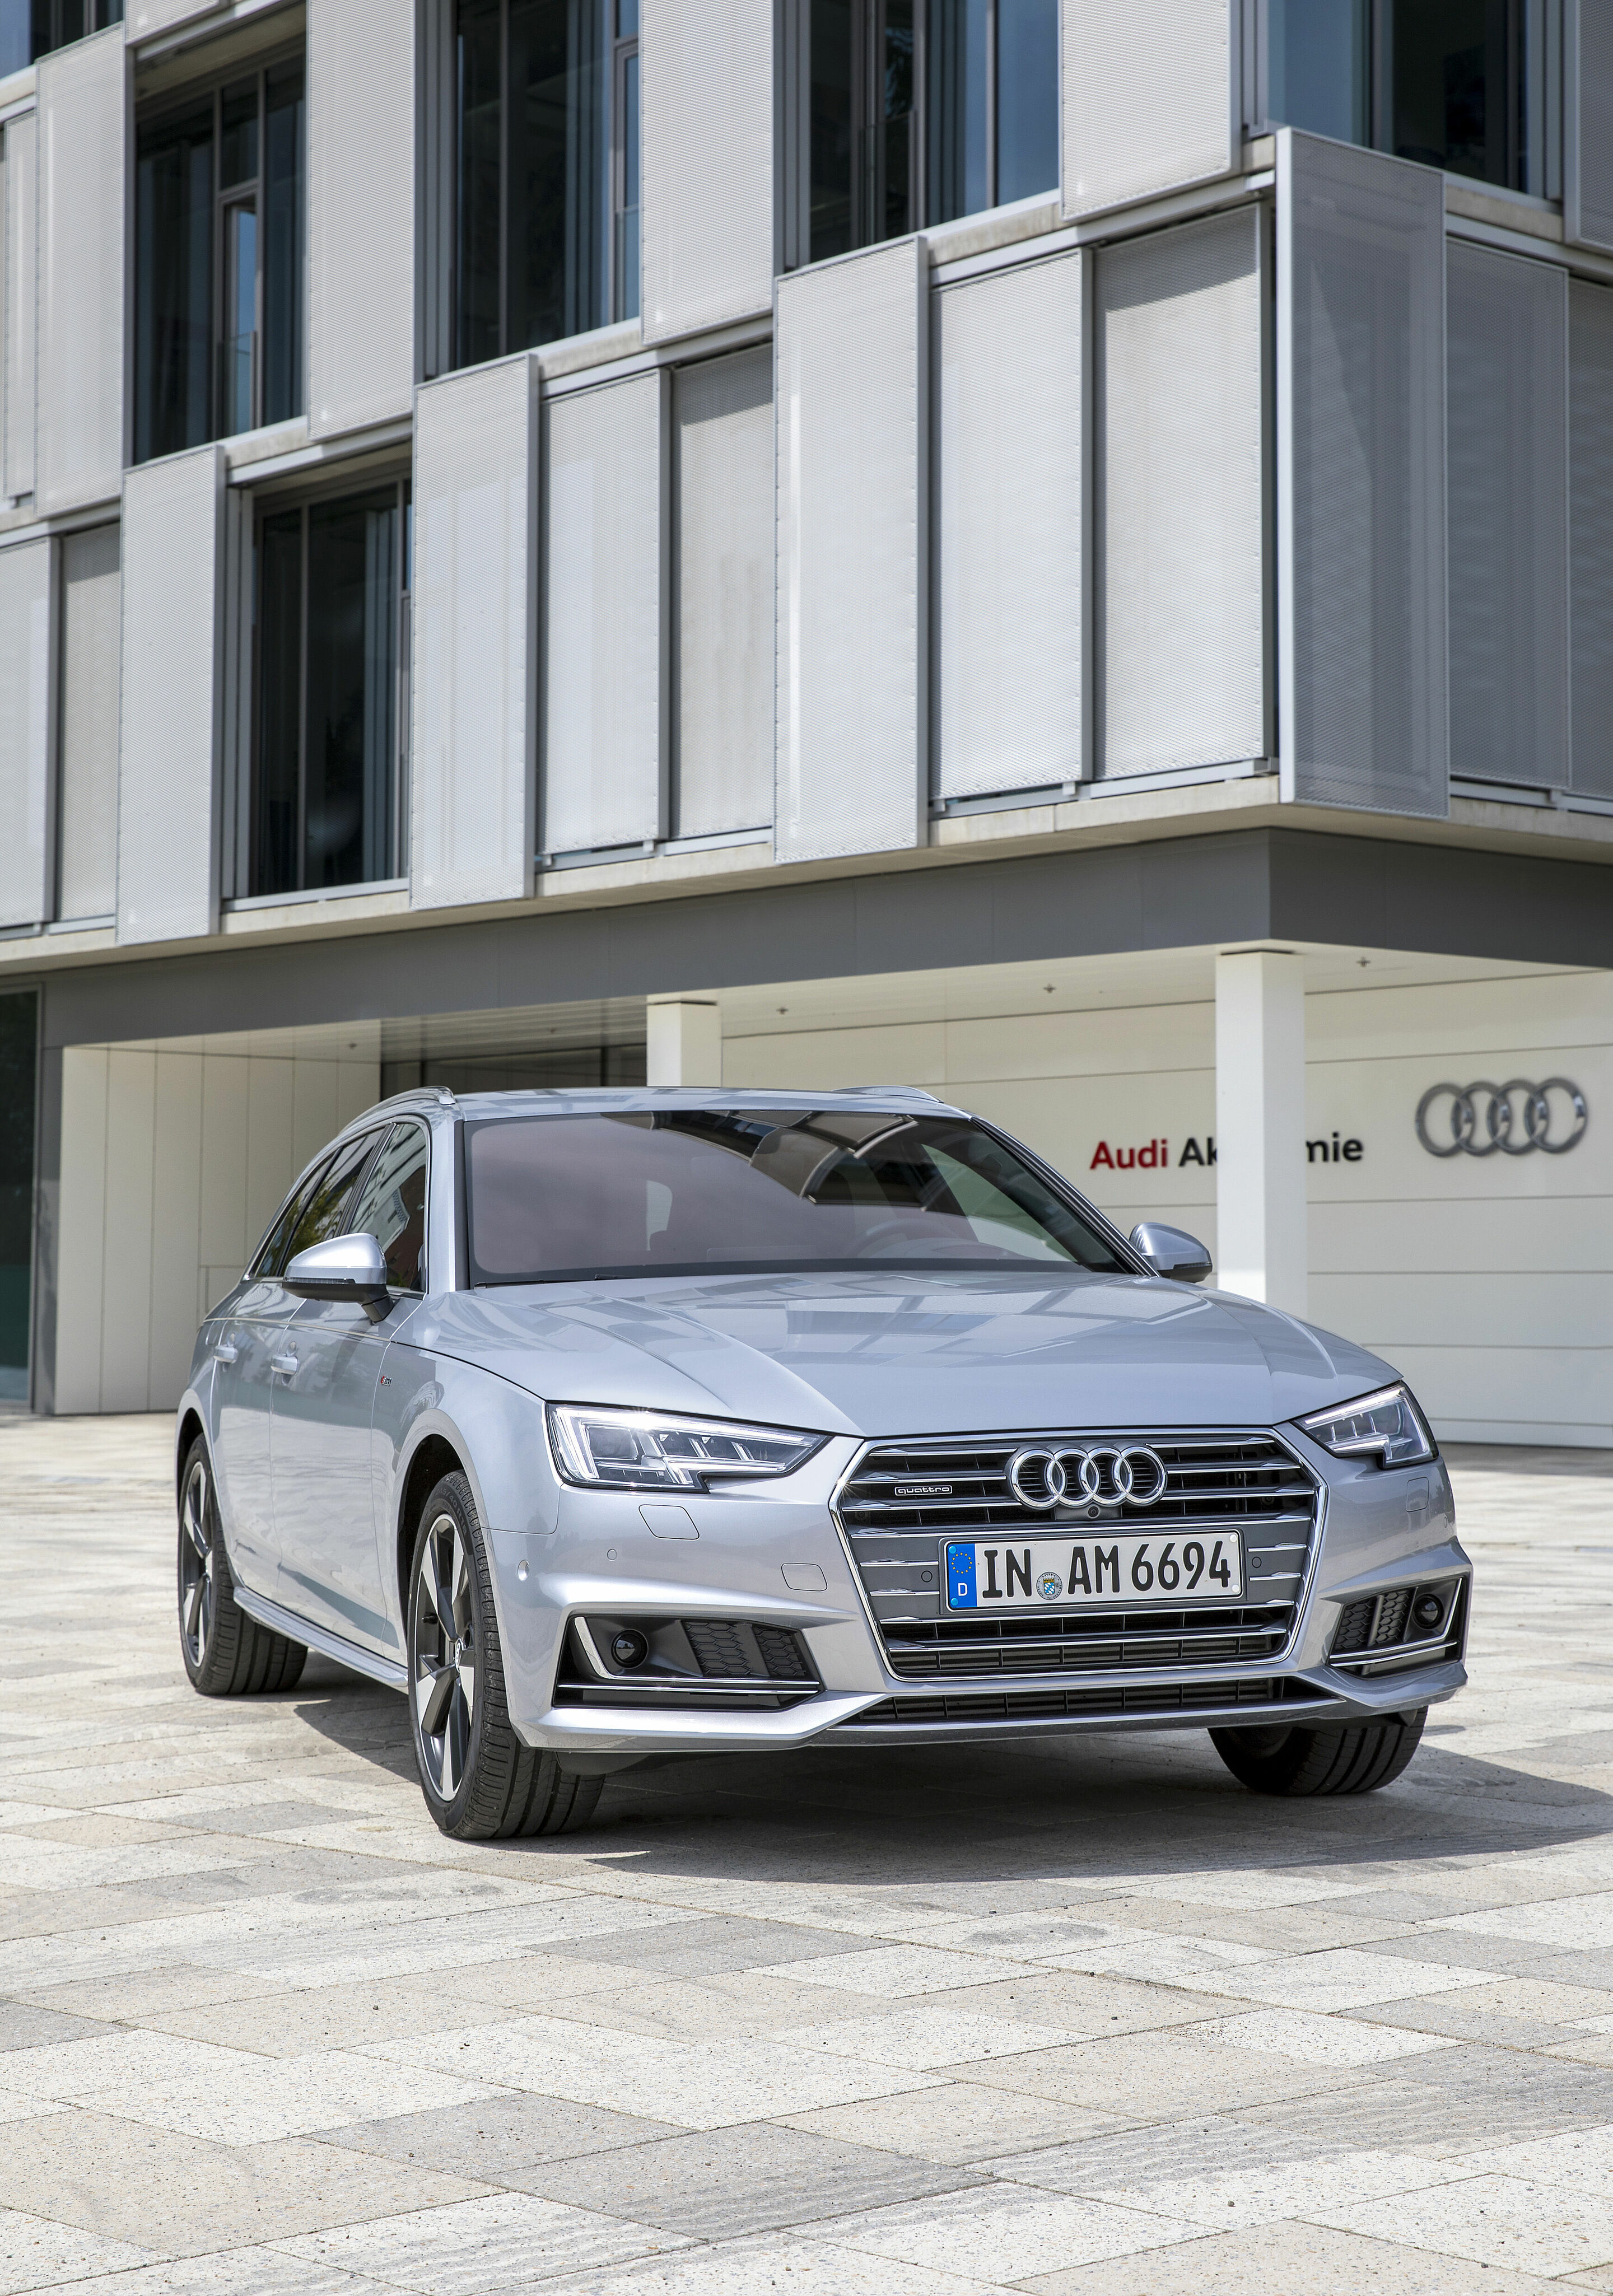 On the road with the Audi A4 Avant in Ingolstadt